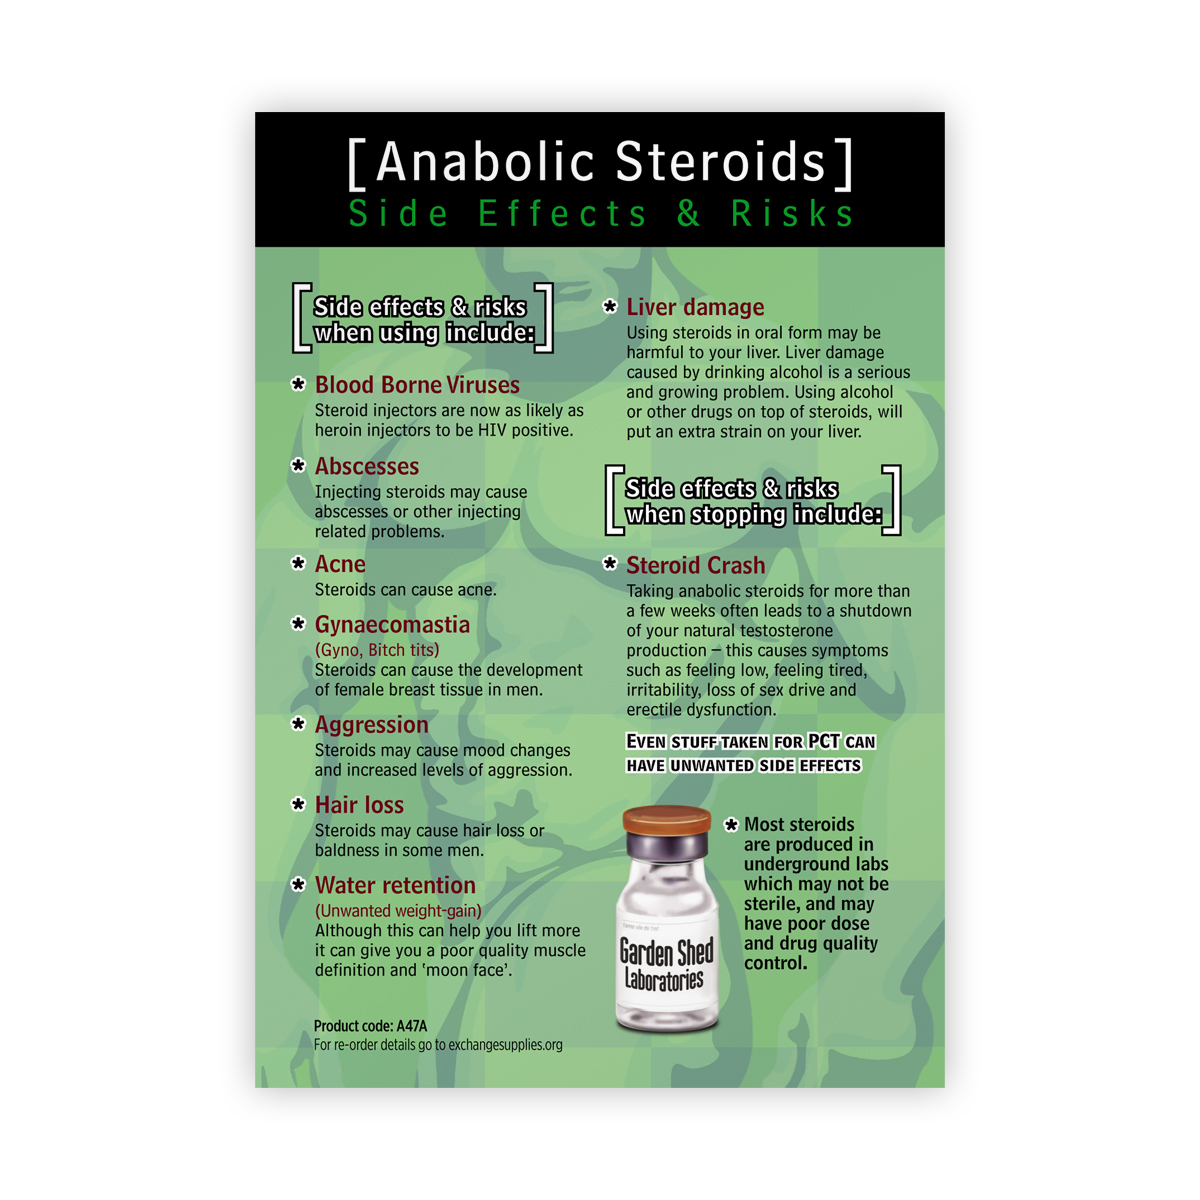 Anabolic Steroids - side effects and risks (Australian Edition)